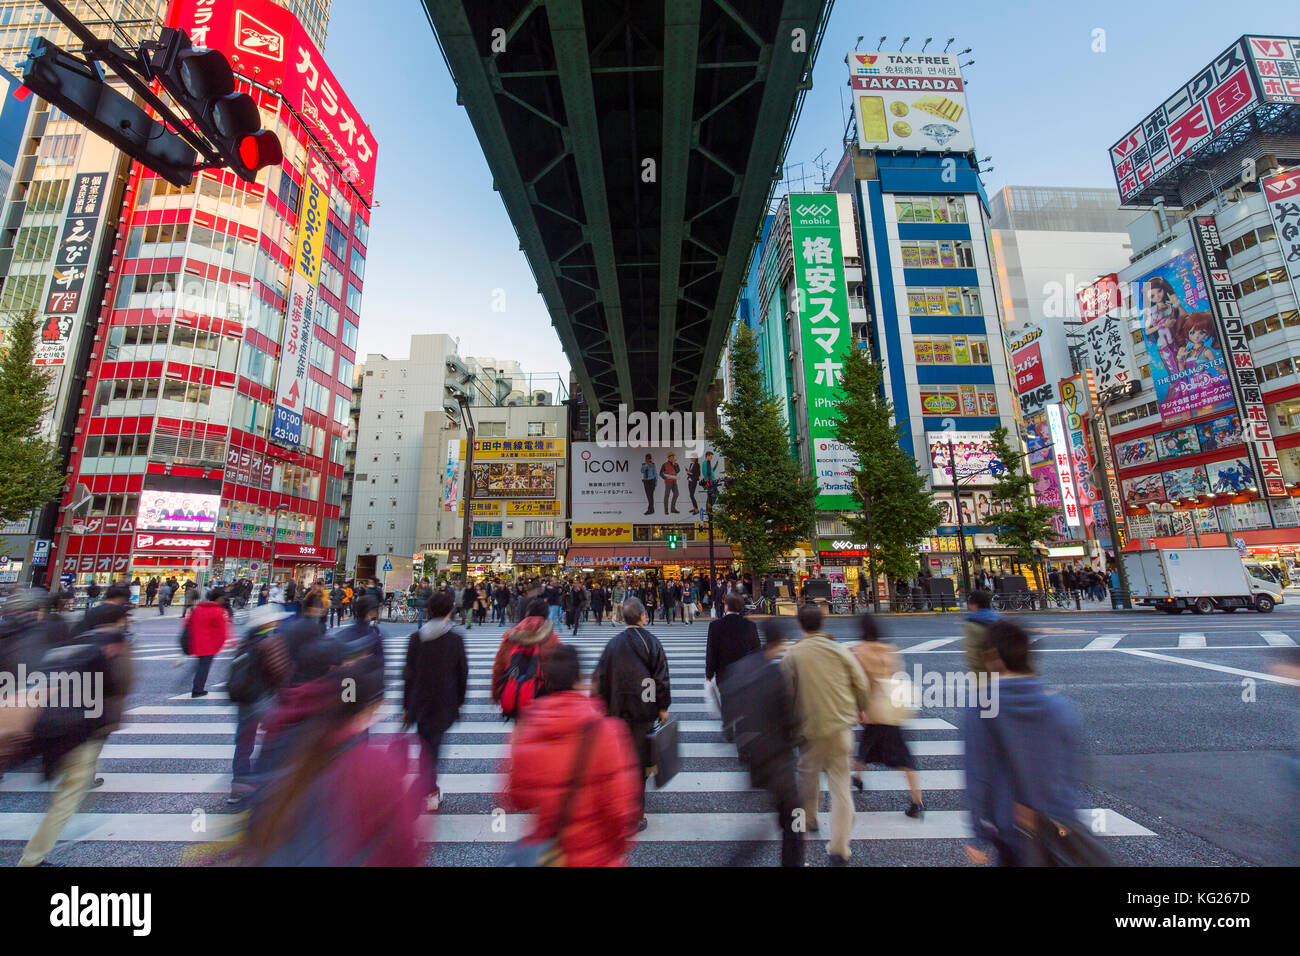 Neon signs cover buildings in the consumer electronics district of Akihabara, Tokyo, Japan, Asia Stock Photo